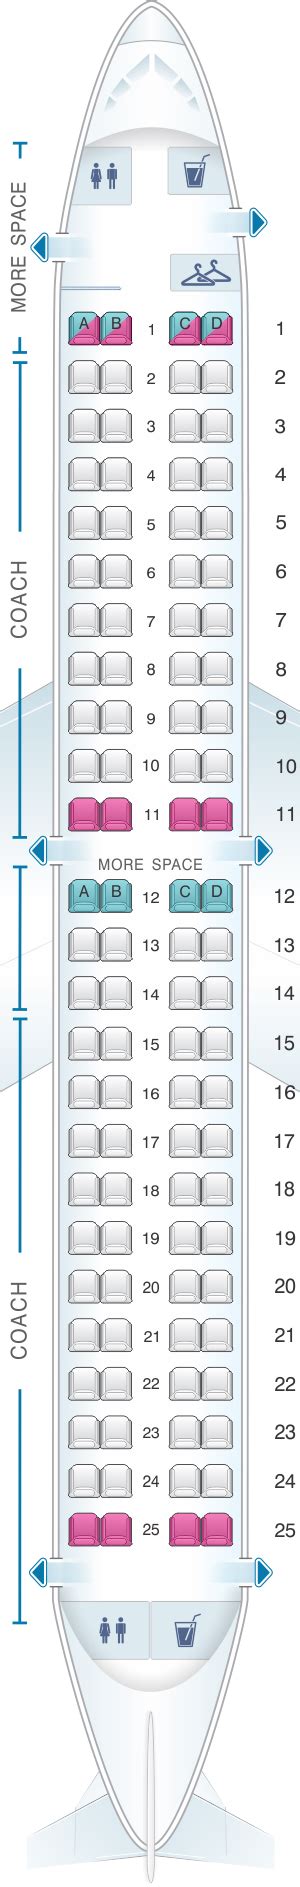 E190 jetblue seat map. Jetblue Airways Embraer 190 Seat Map; Seat 13a; JetBlue Airways Reviews. Seating Charts · Airbus A320 · Airbus A321 · Airbus A321 (transcon) Embraer E190 . JetBlue Airways Embraer E190 Seat Reviews Show seat chart [1] Pro tips: this seat may have extra legroom : no seat reclining in front of you : 